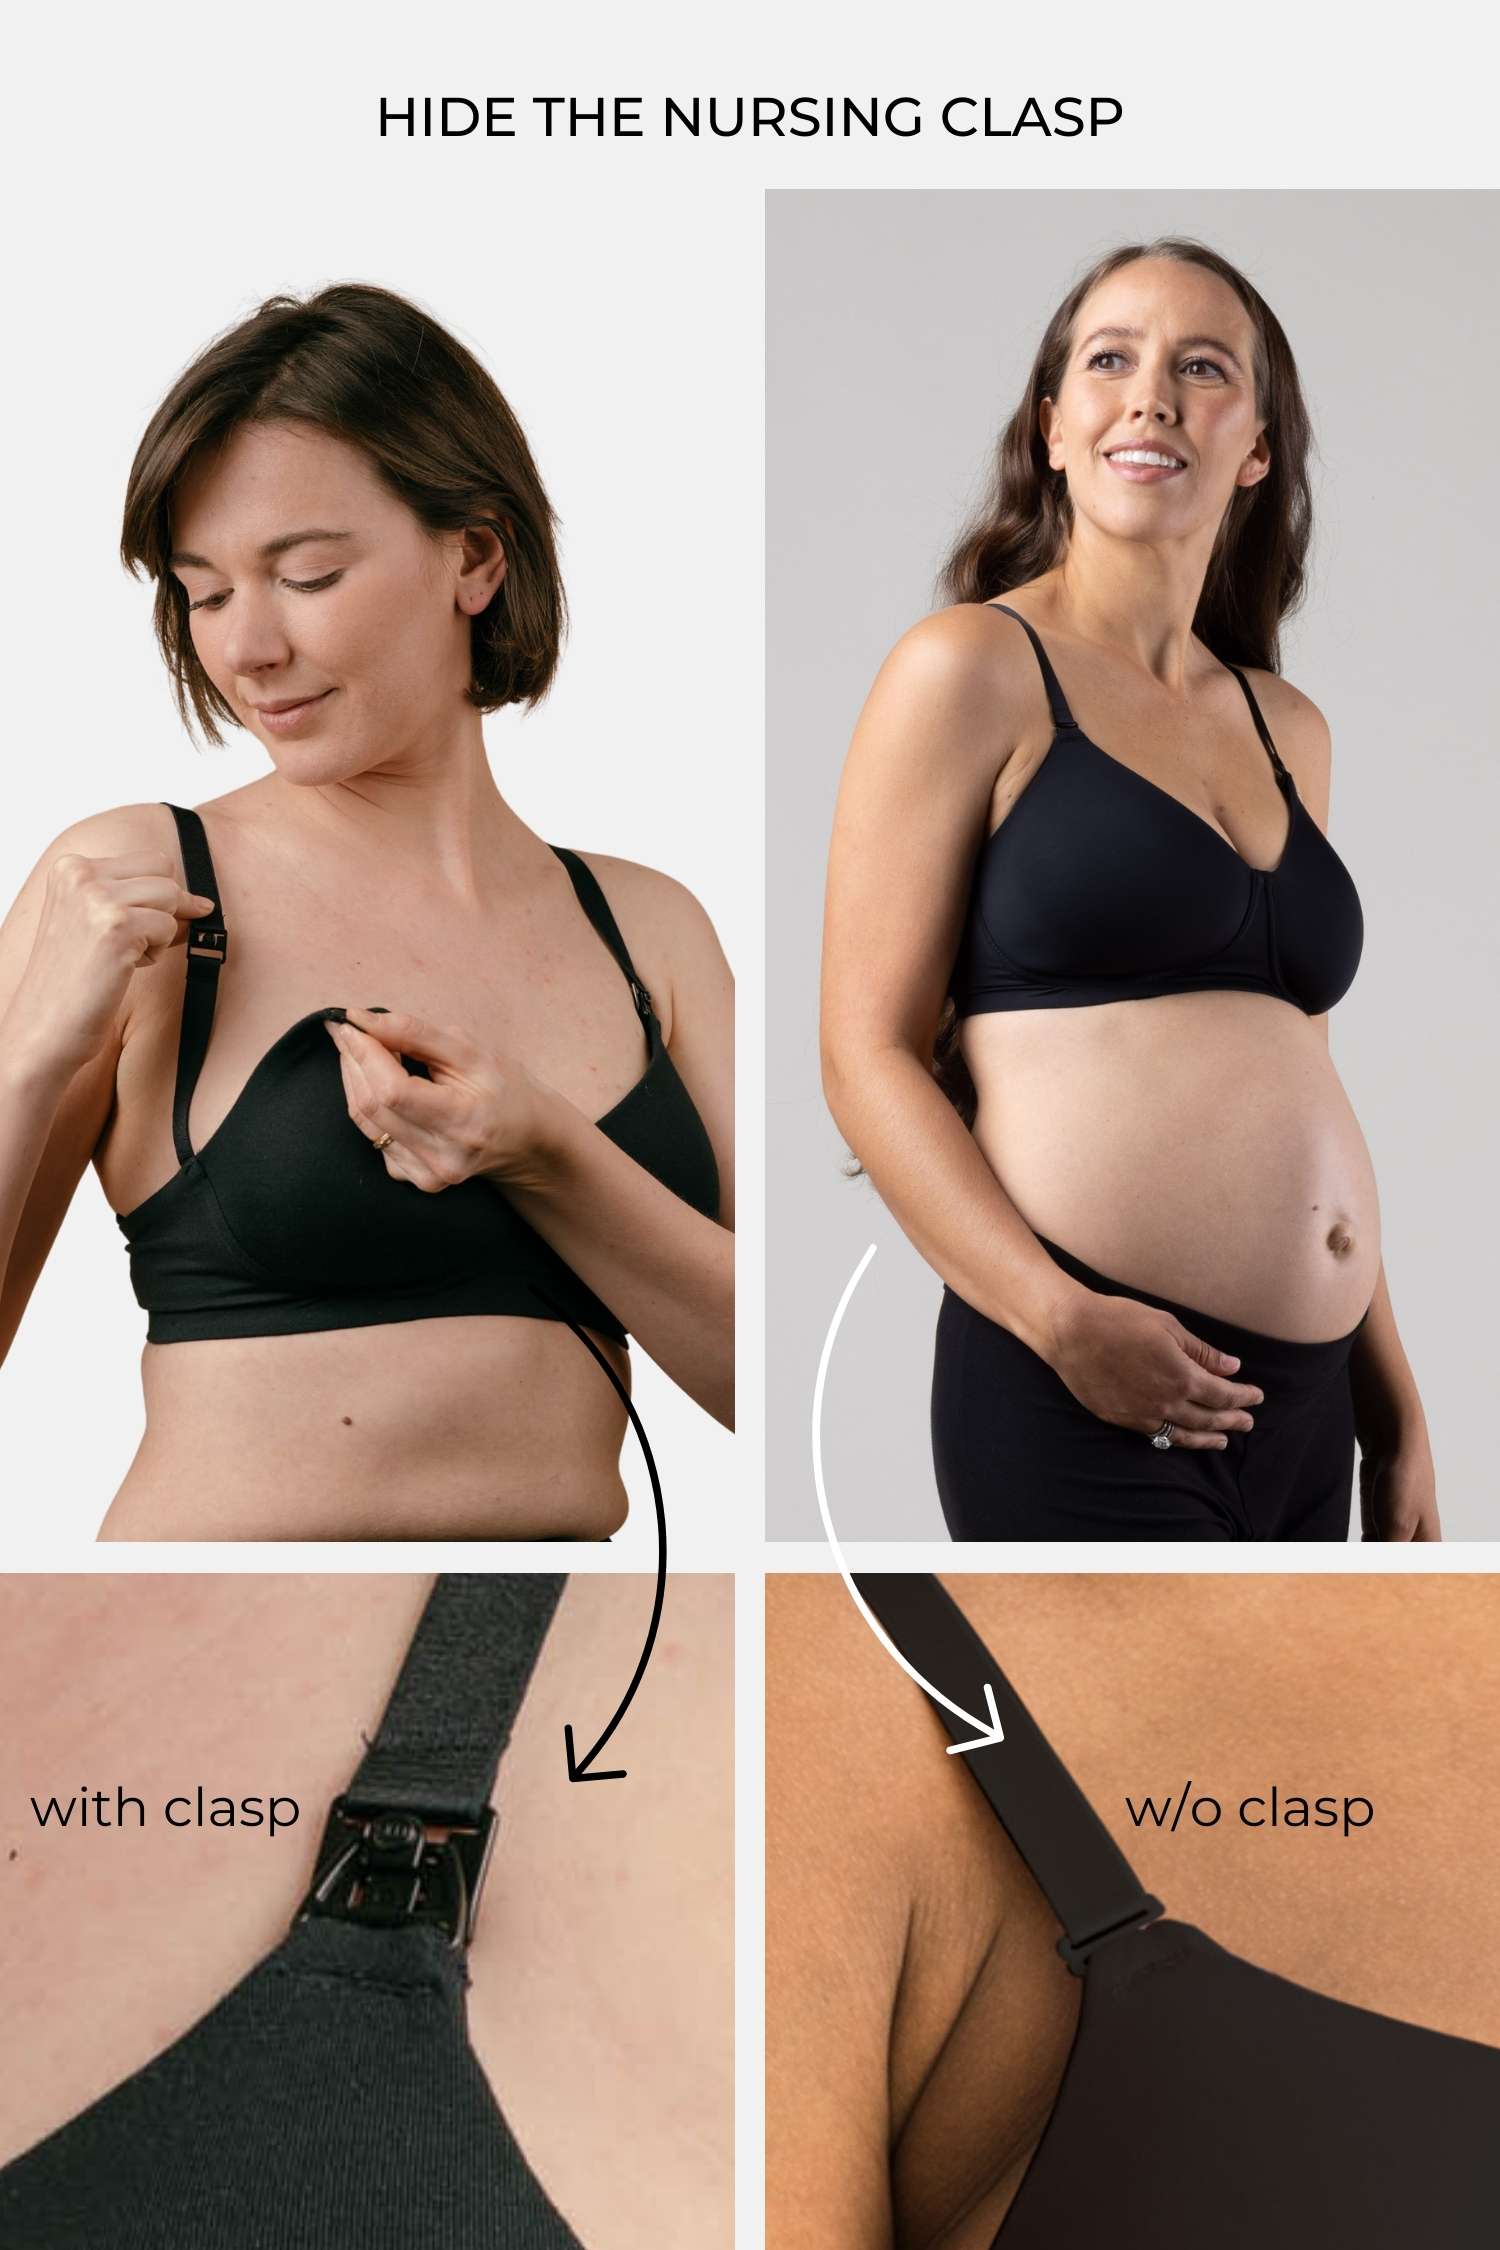 Infographic showing side by side images of a pregnant woman and a breastfeeding woman to highlight the ability to hide the nursing claps in the Undercover Nursing T-Shirt Bra in black. Also zoom images showing with and without the nursing clasp at the top of each bra cup.